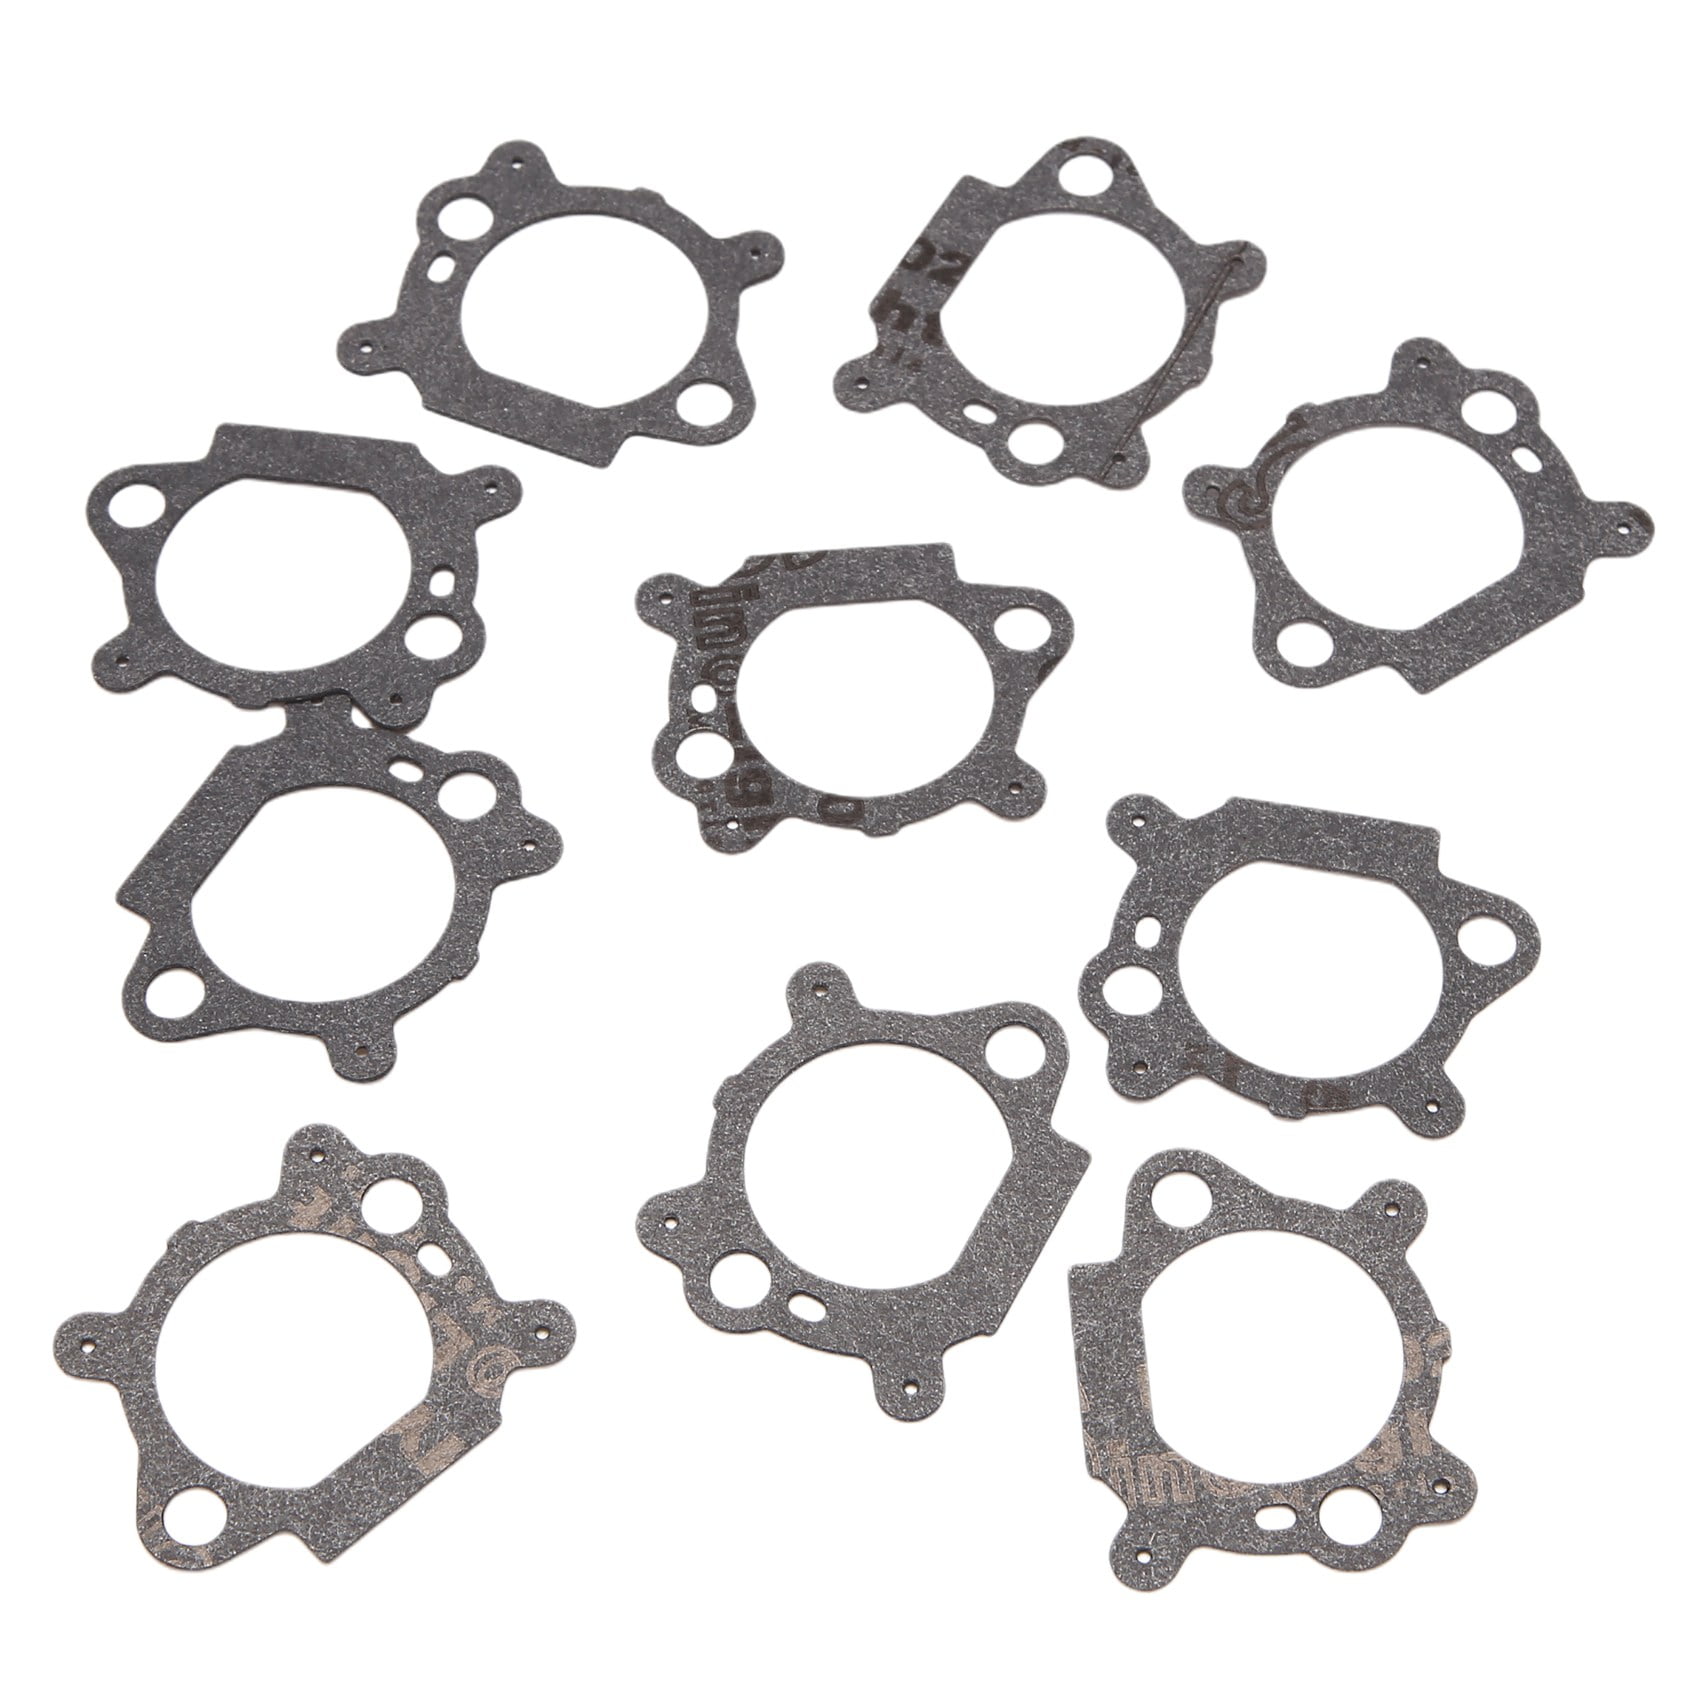 Briggs & Stratton 272653 272653S 795629 Replacement Air Cleaner Gasket 10 Pack 